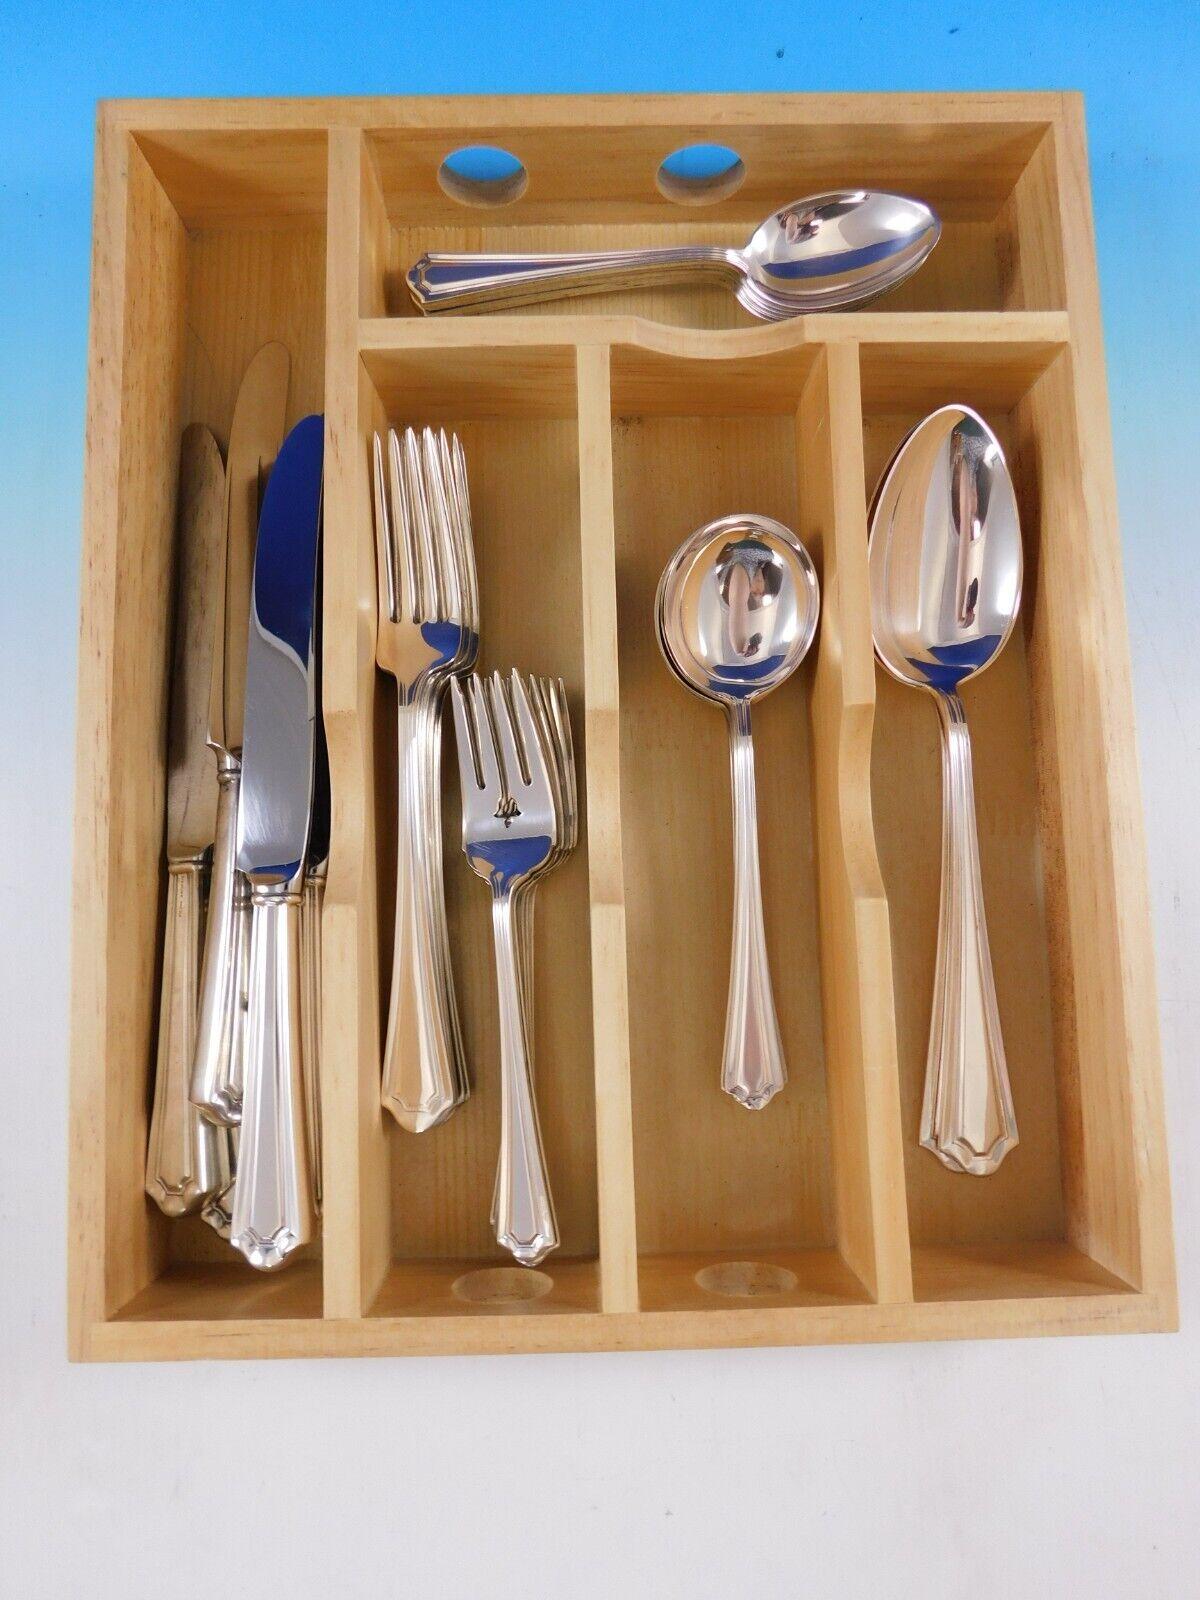 Scarce Mary Warren by Manchester c1932 Sterling Silver flatware set - 37 pieces. This set includes:

6 Knives, 9 1/4